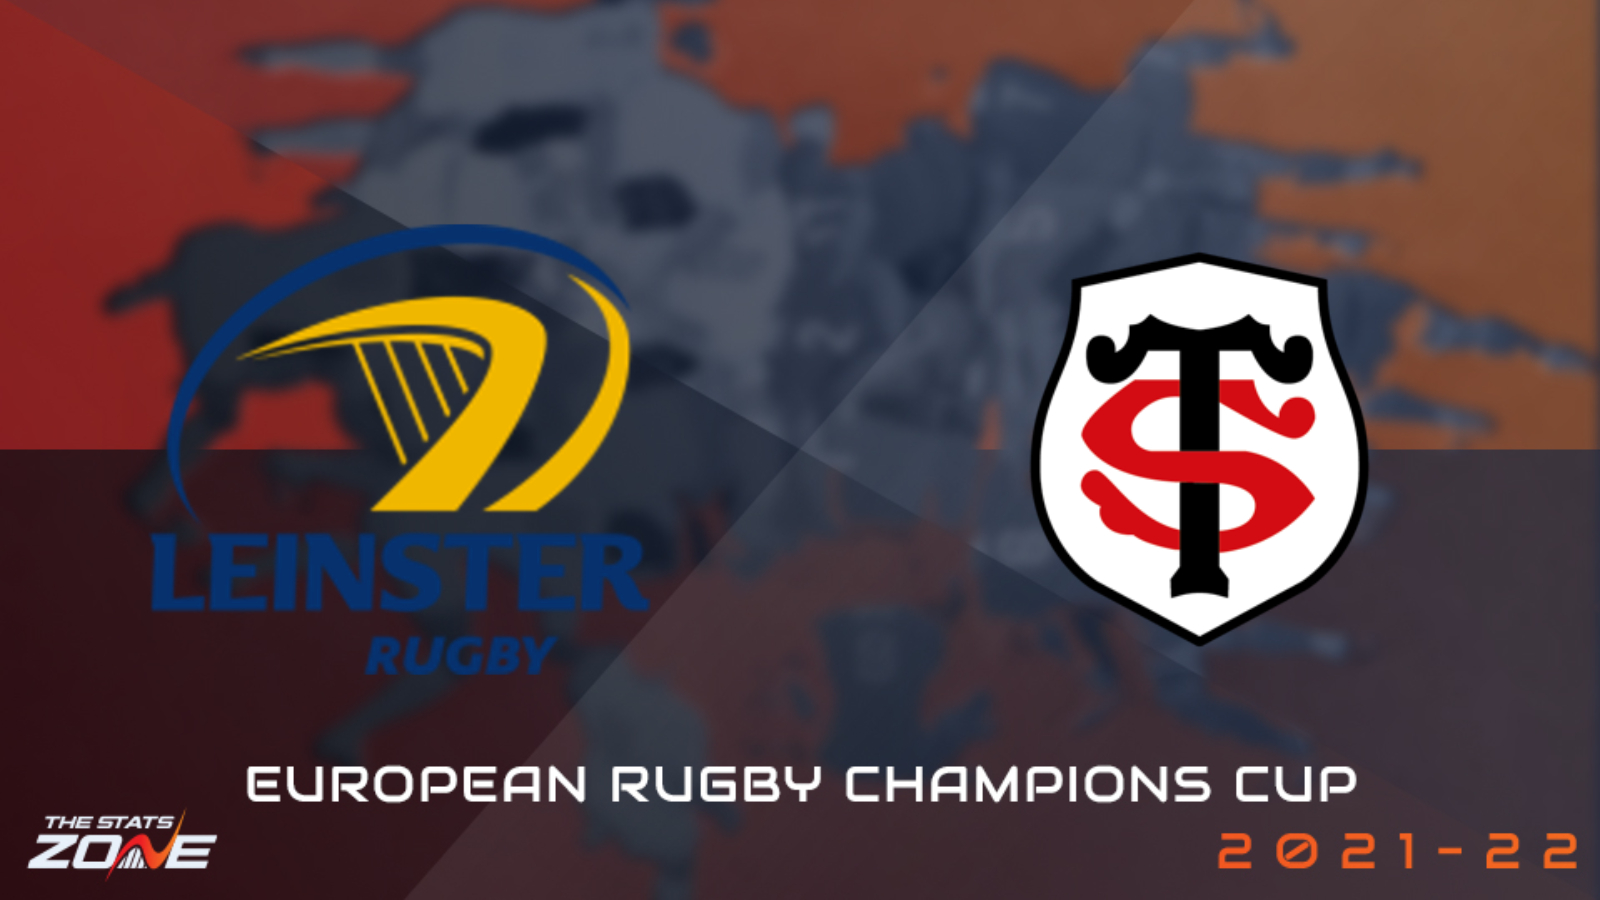 Leinster vs Toulouse Preview and Prediction